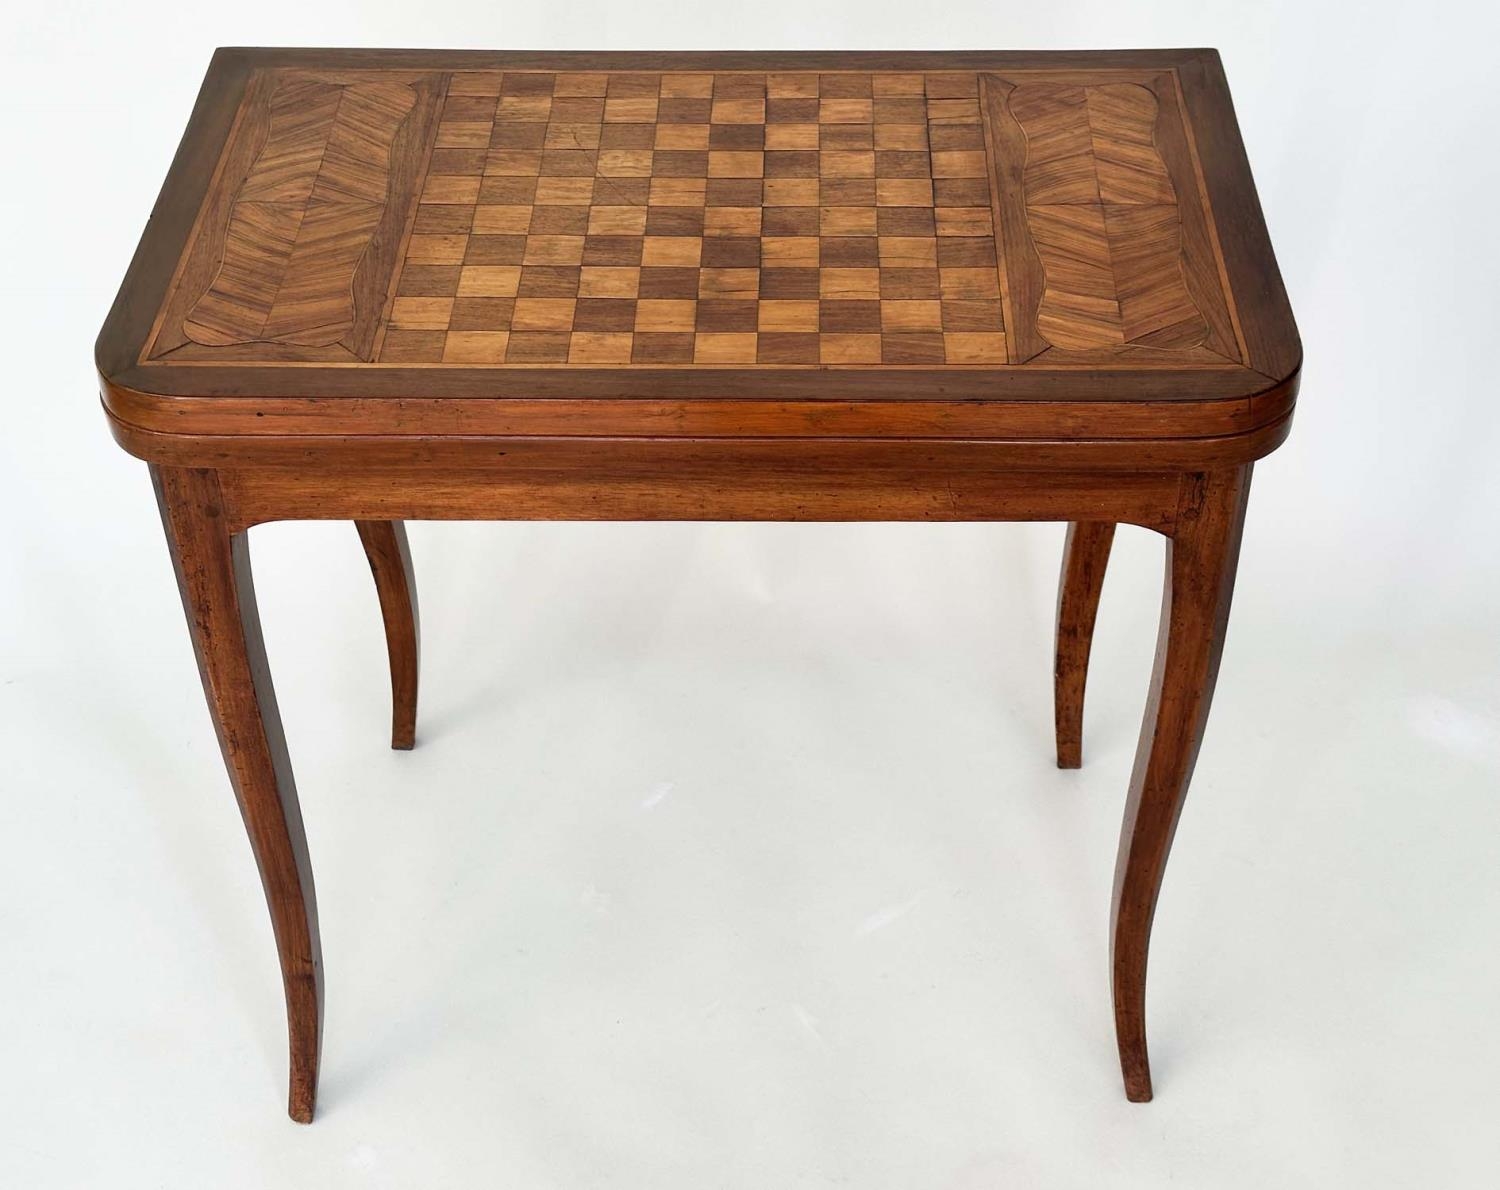 DUTCH GAMES TABLE, 19th century Dutch mahogany, Kingwood and satinwood inlaid with chequer